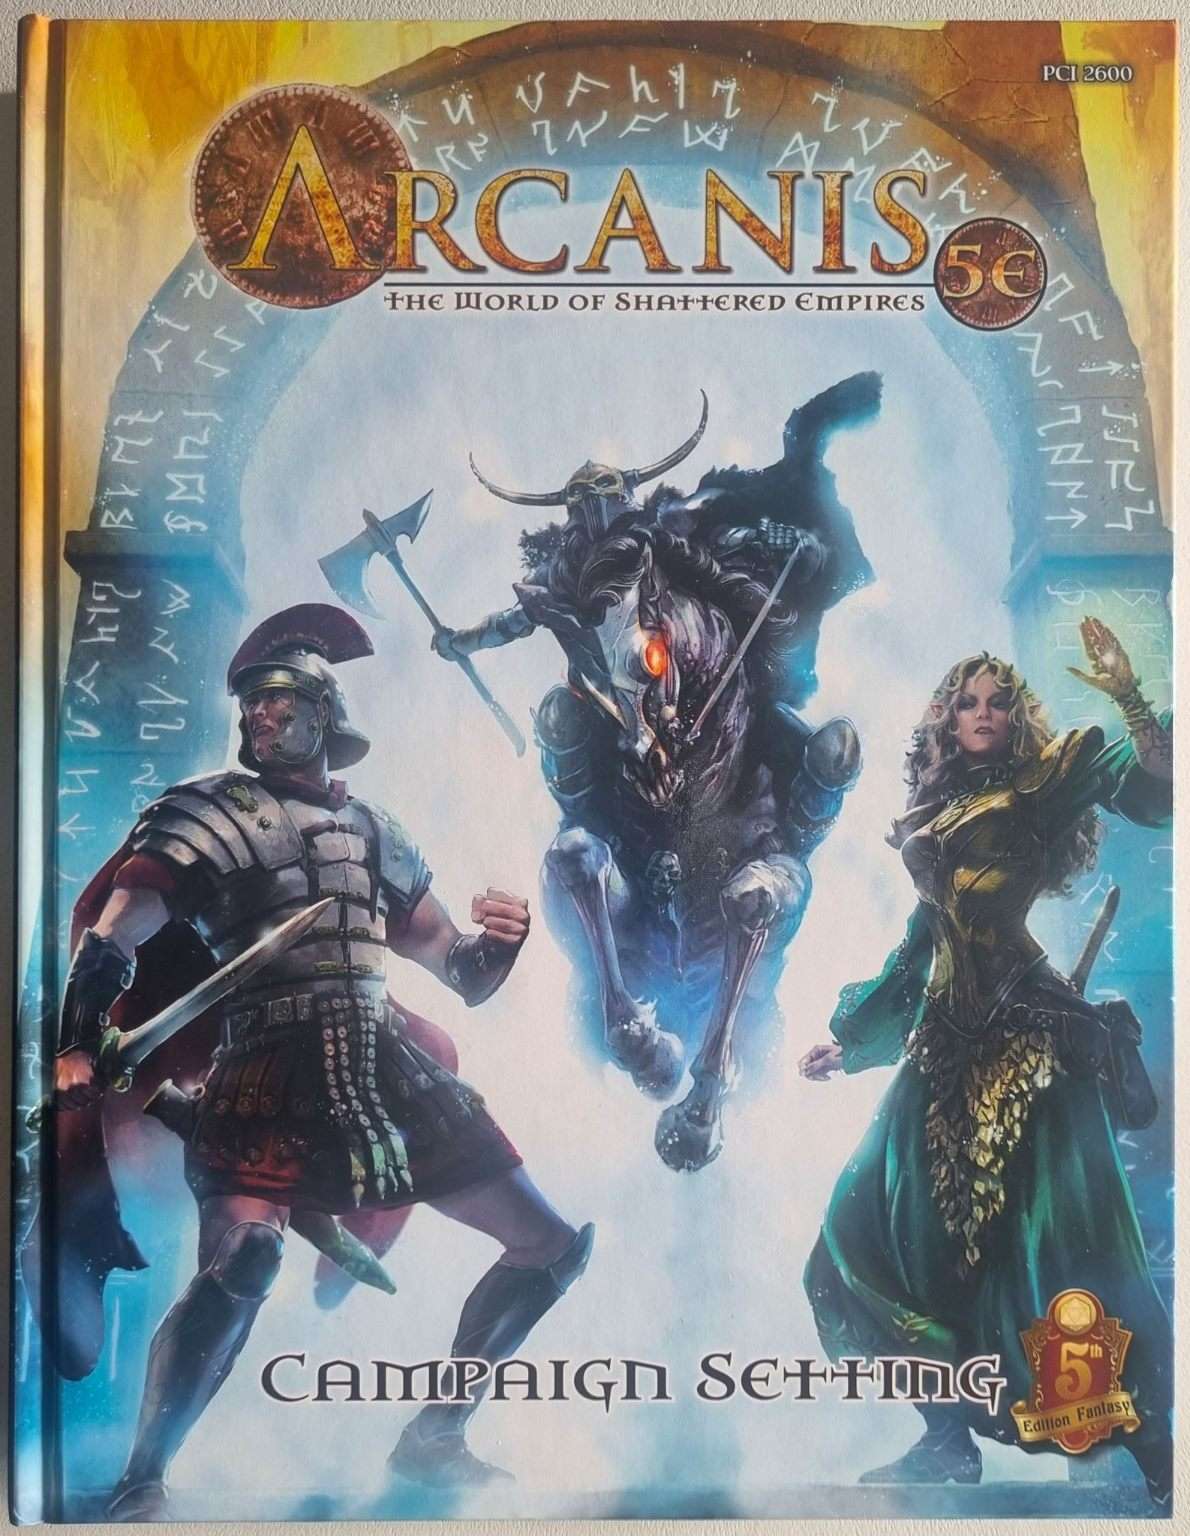 Arcanis The World of Shattered Empires Campaign Setting - D&D 5th Edition (5e) Default Title